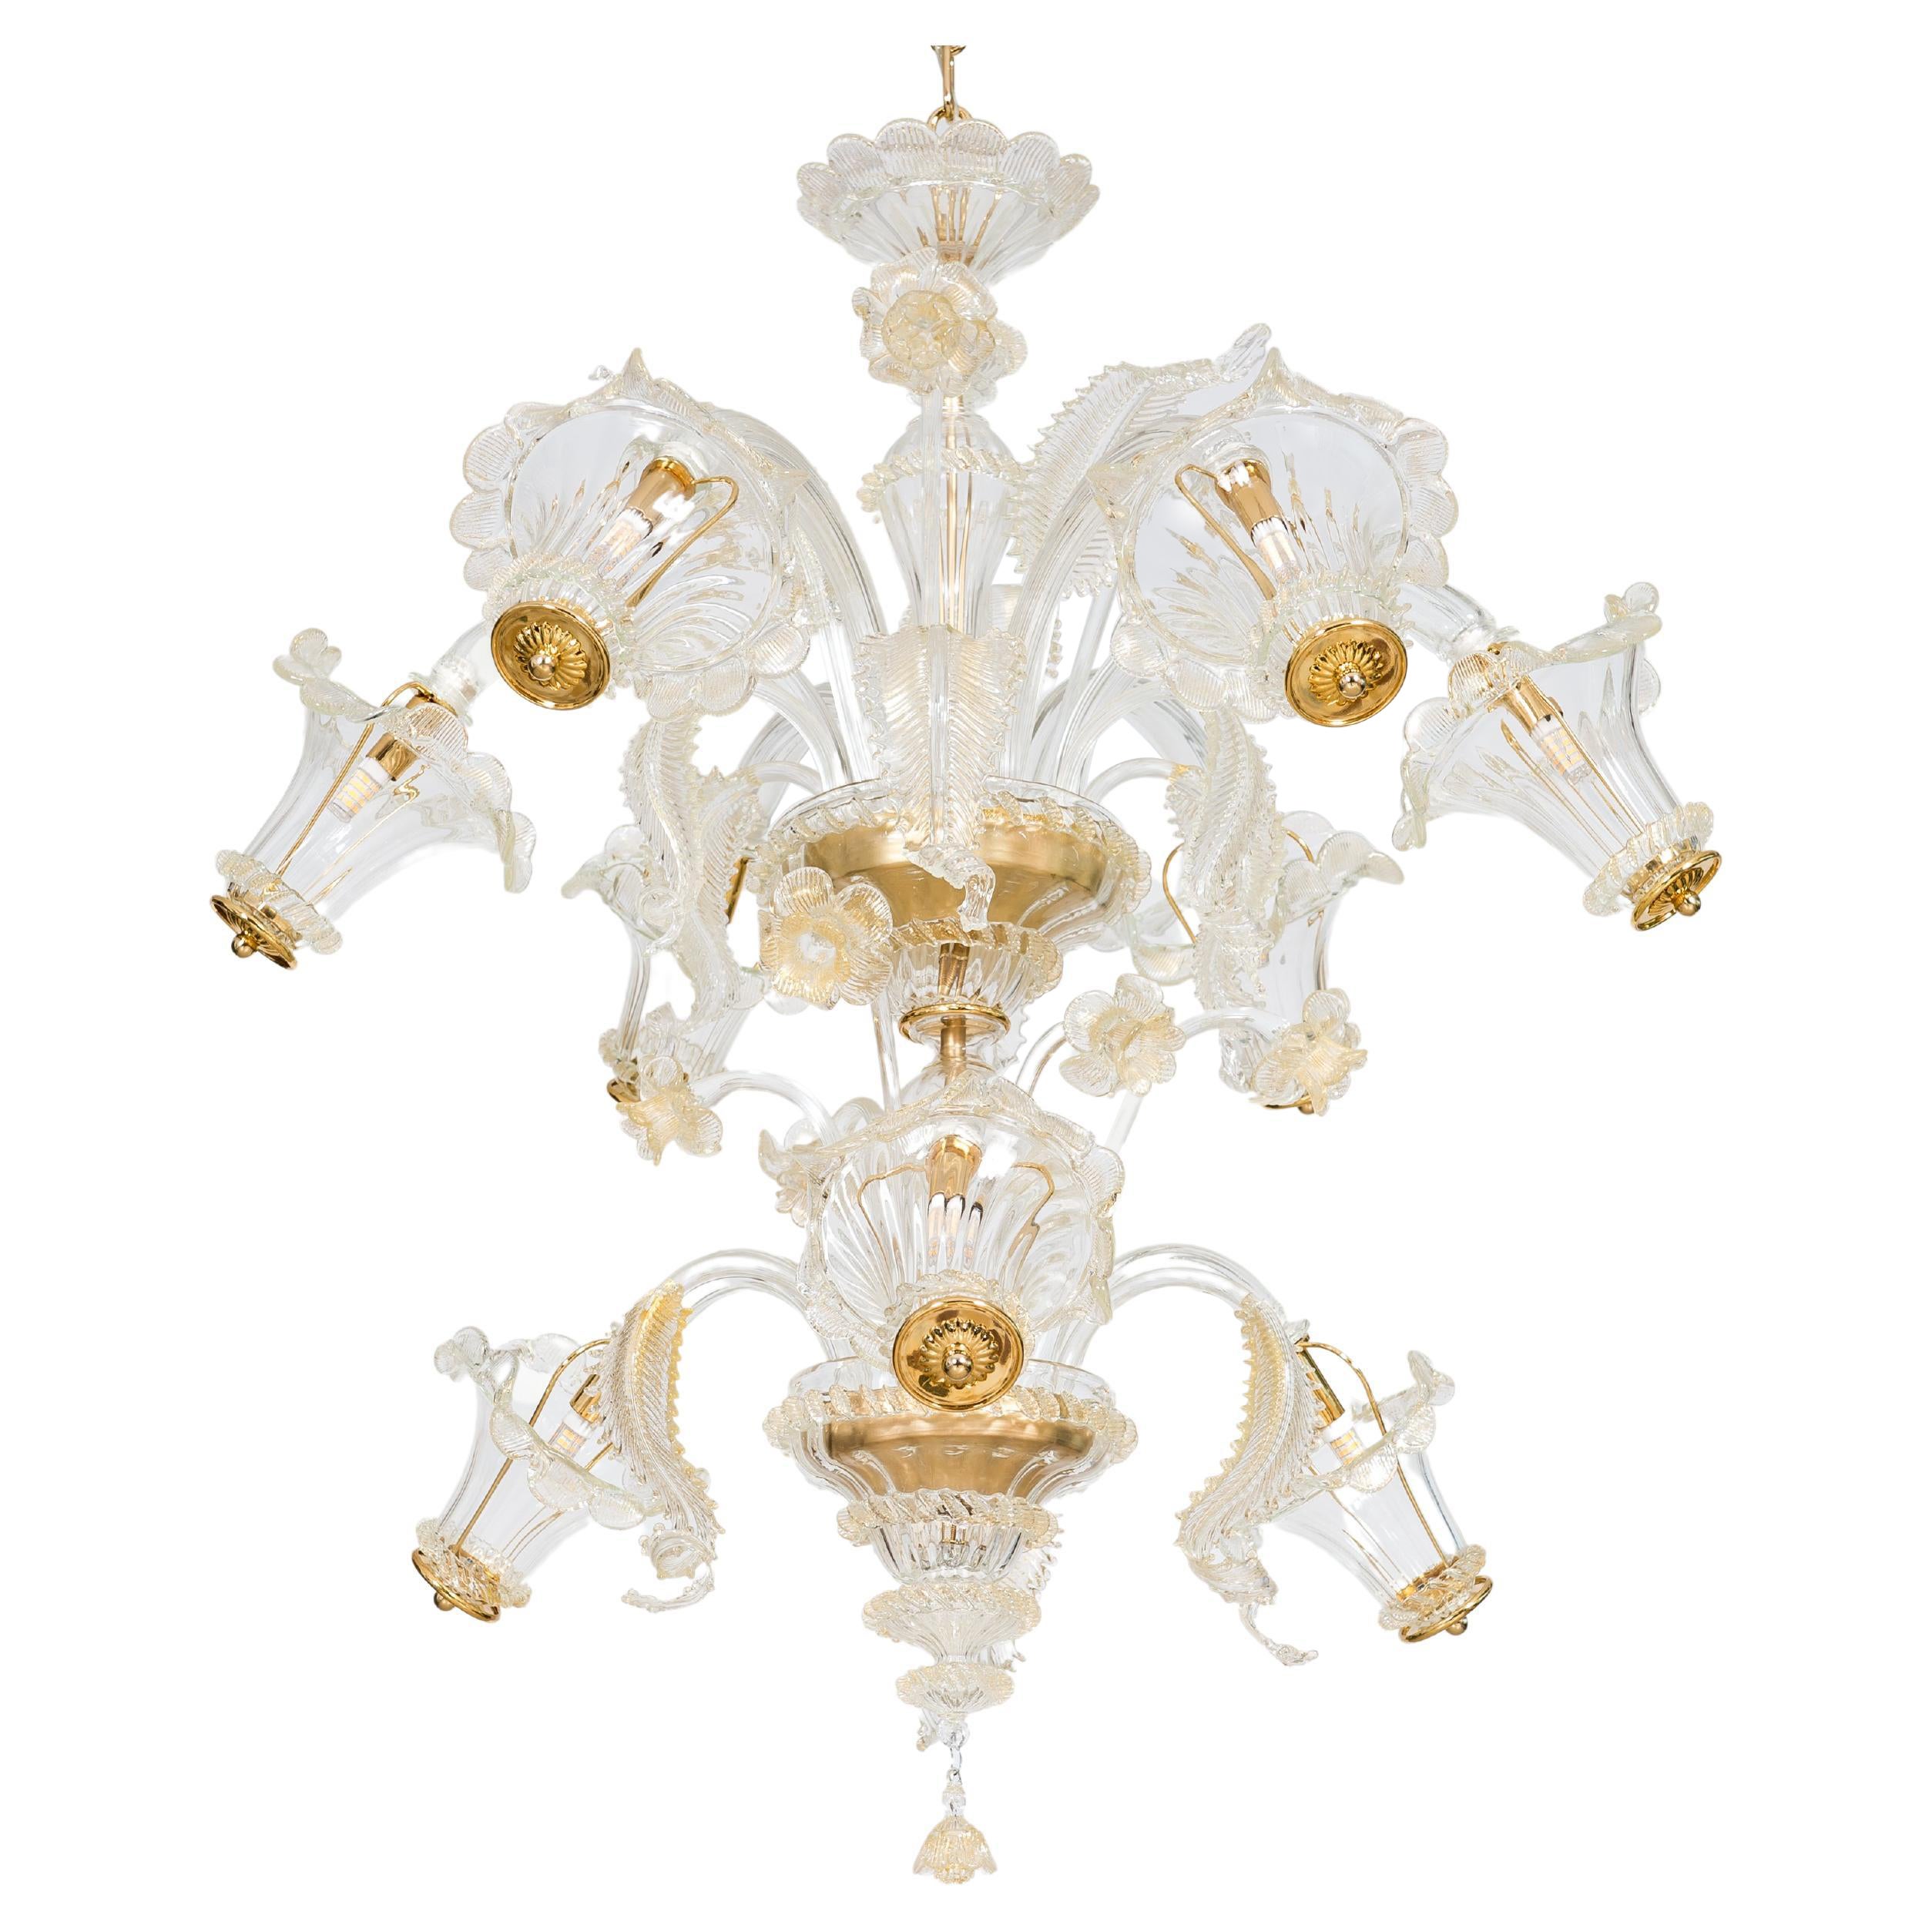 Golden Murano Glass Chandelier with 9 Lights, 21st Century, Italy For Sale